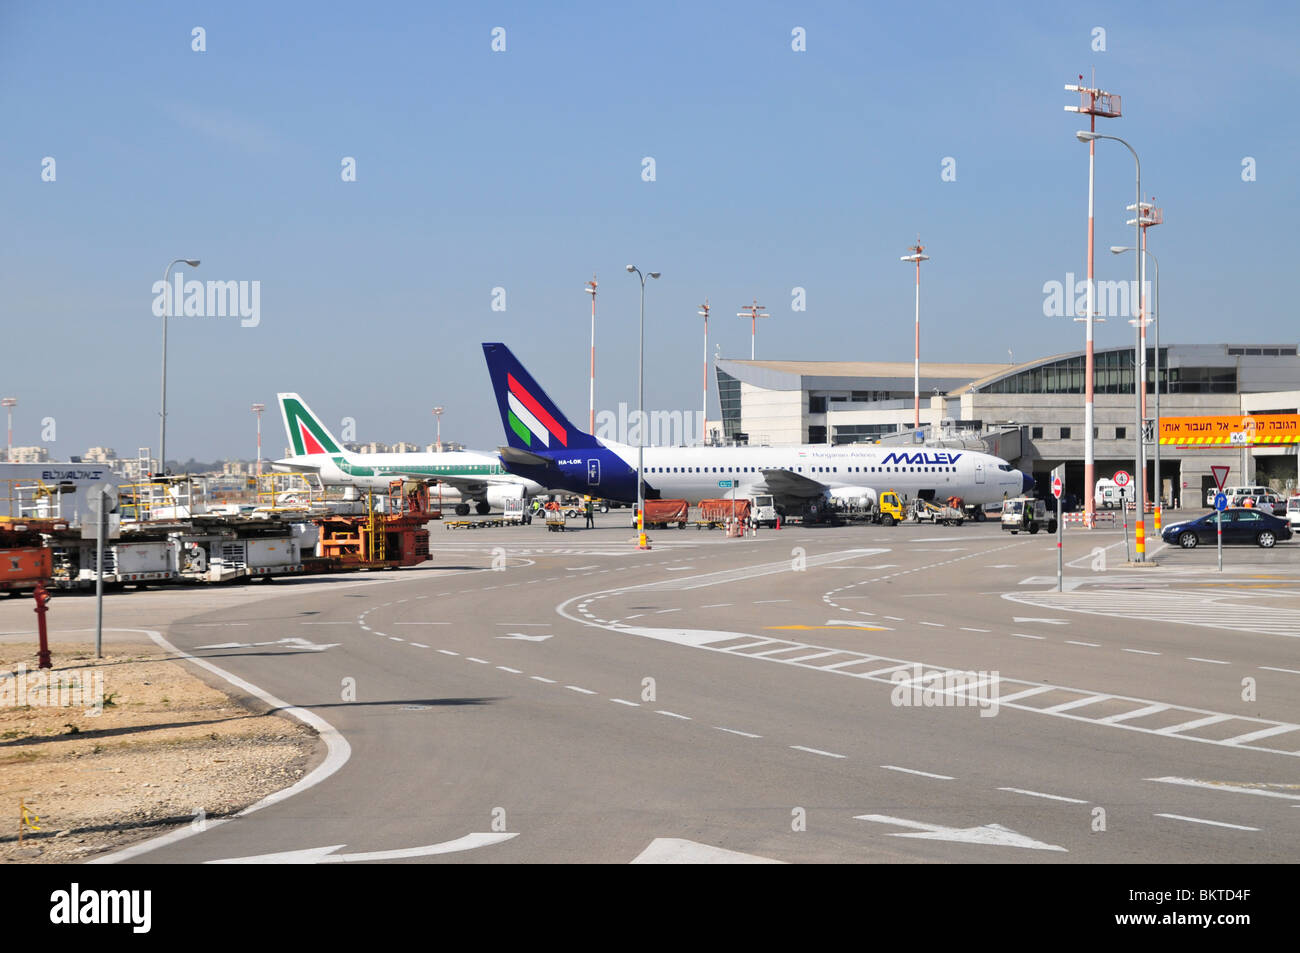 Israel, Ben-Gurion international Airport Malev Hungarian Airlines and Alitalia Passenger Jets on the ground Stock Photo